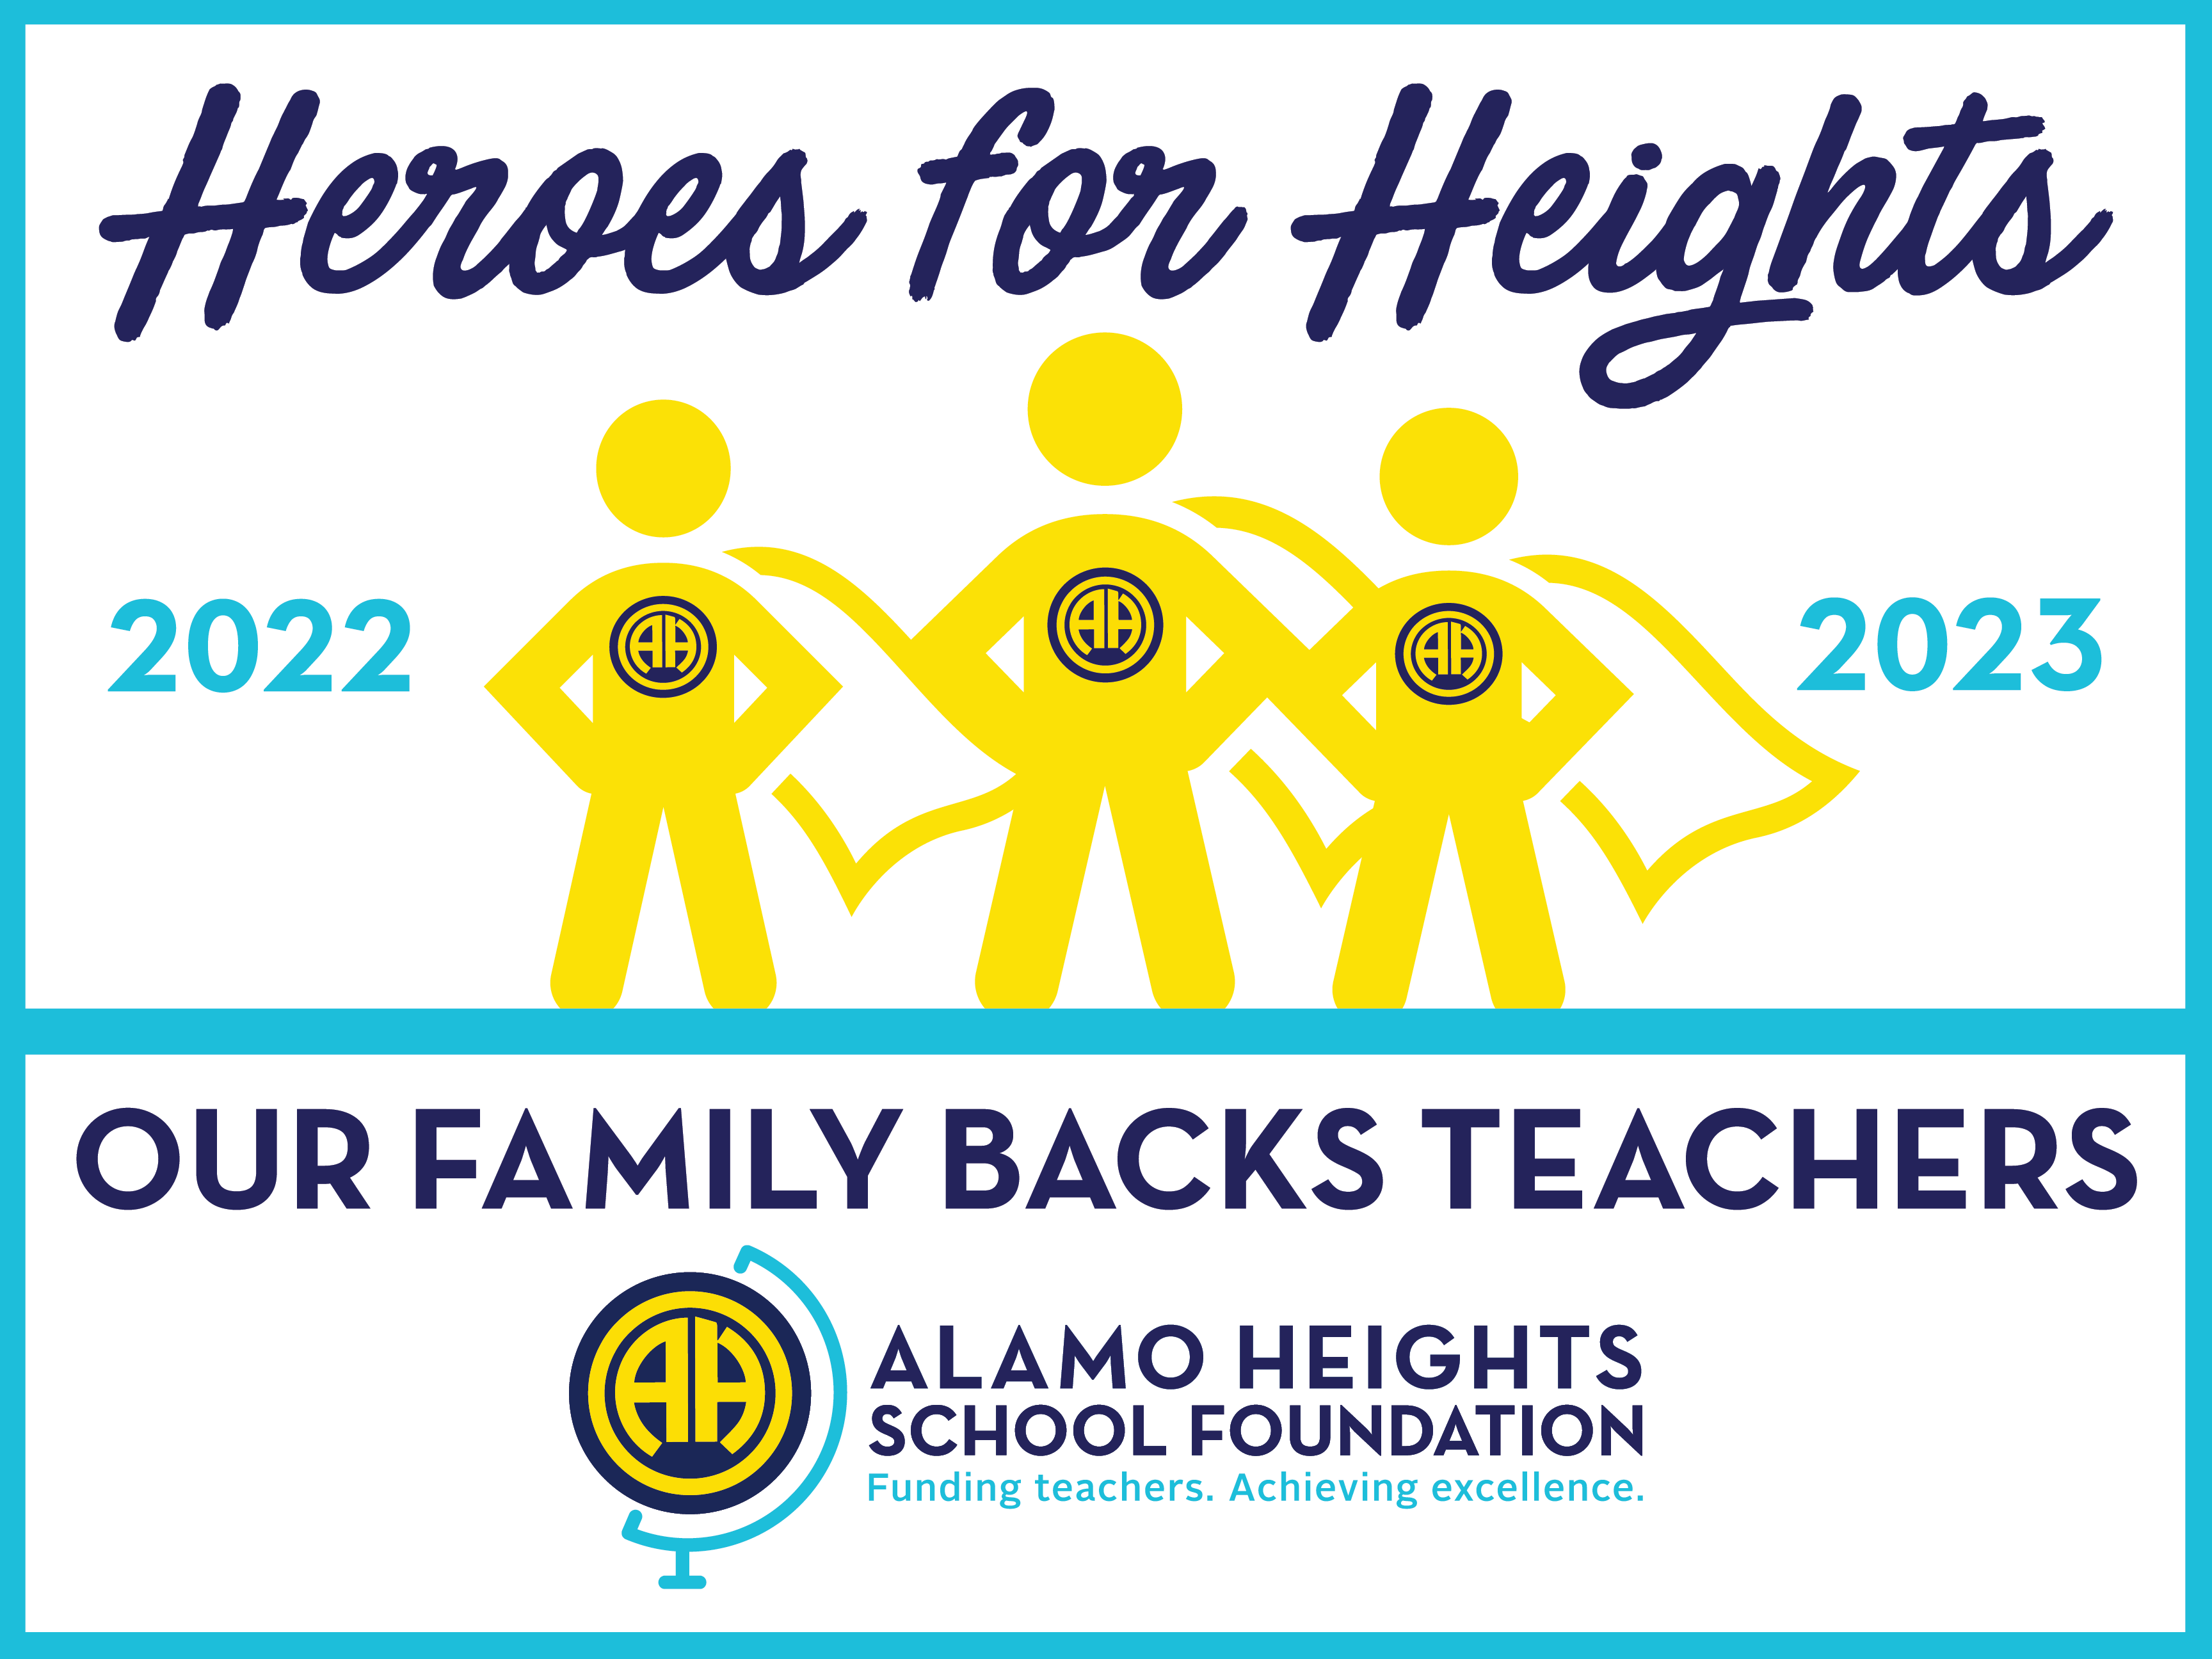 Heroes for Heights 2022 - 2023